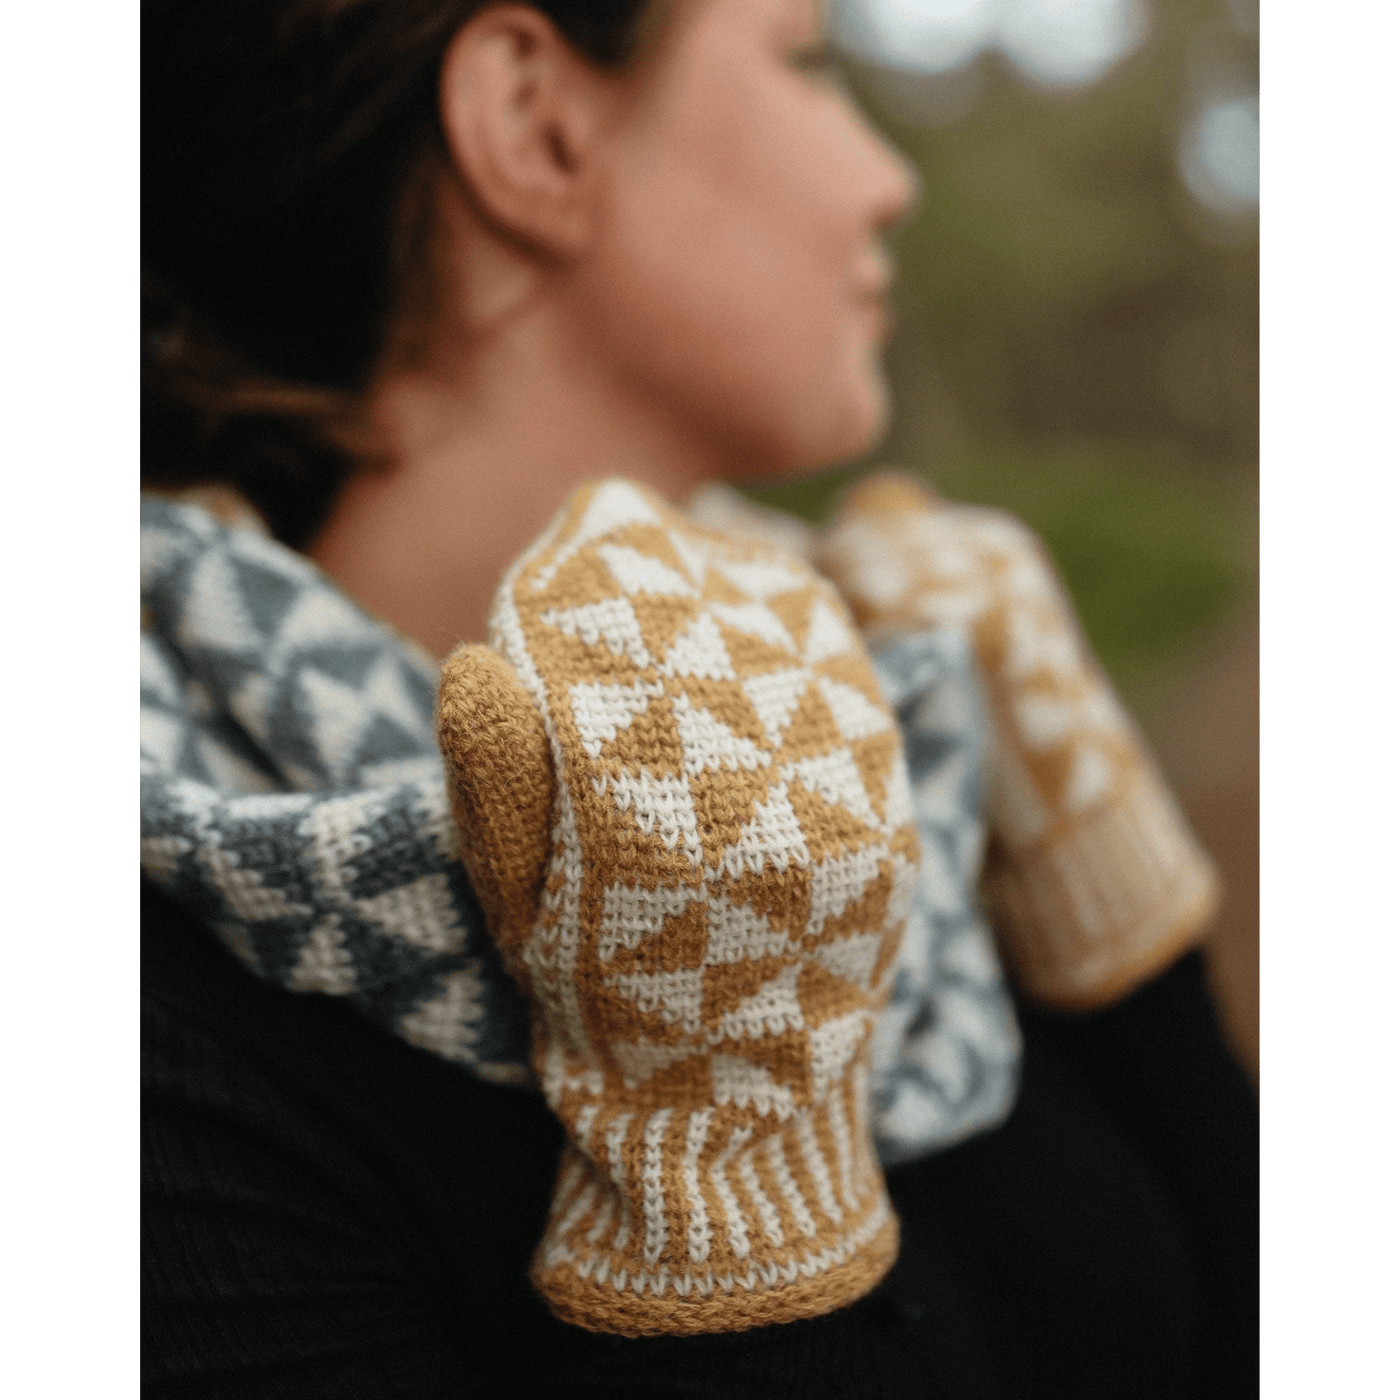 The Woolly Thistle Moorit Magazine - Issue 1 image from magazine showing yellow and white knitted mittens and blue and while knitted scarf